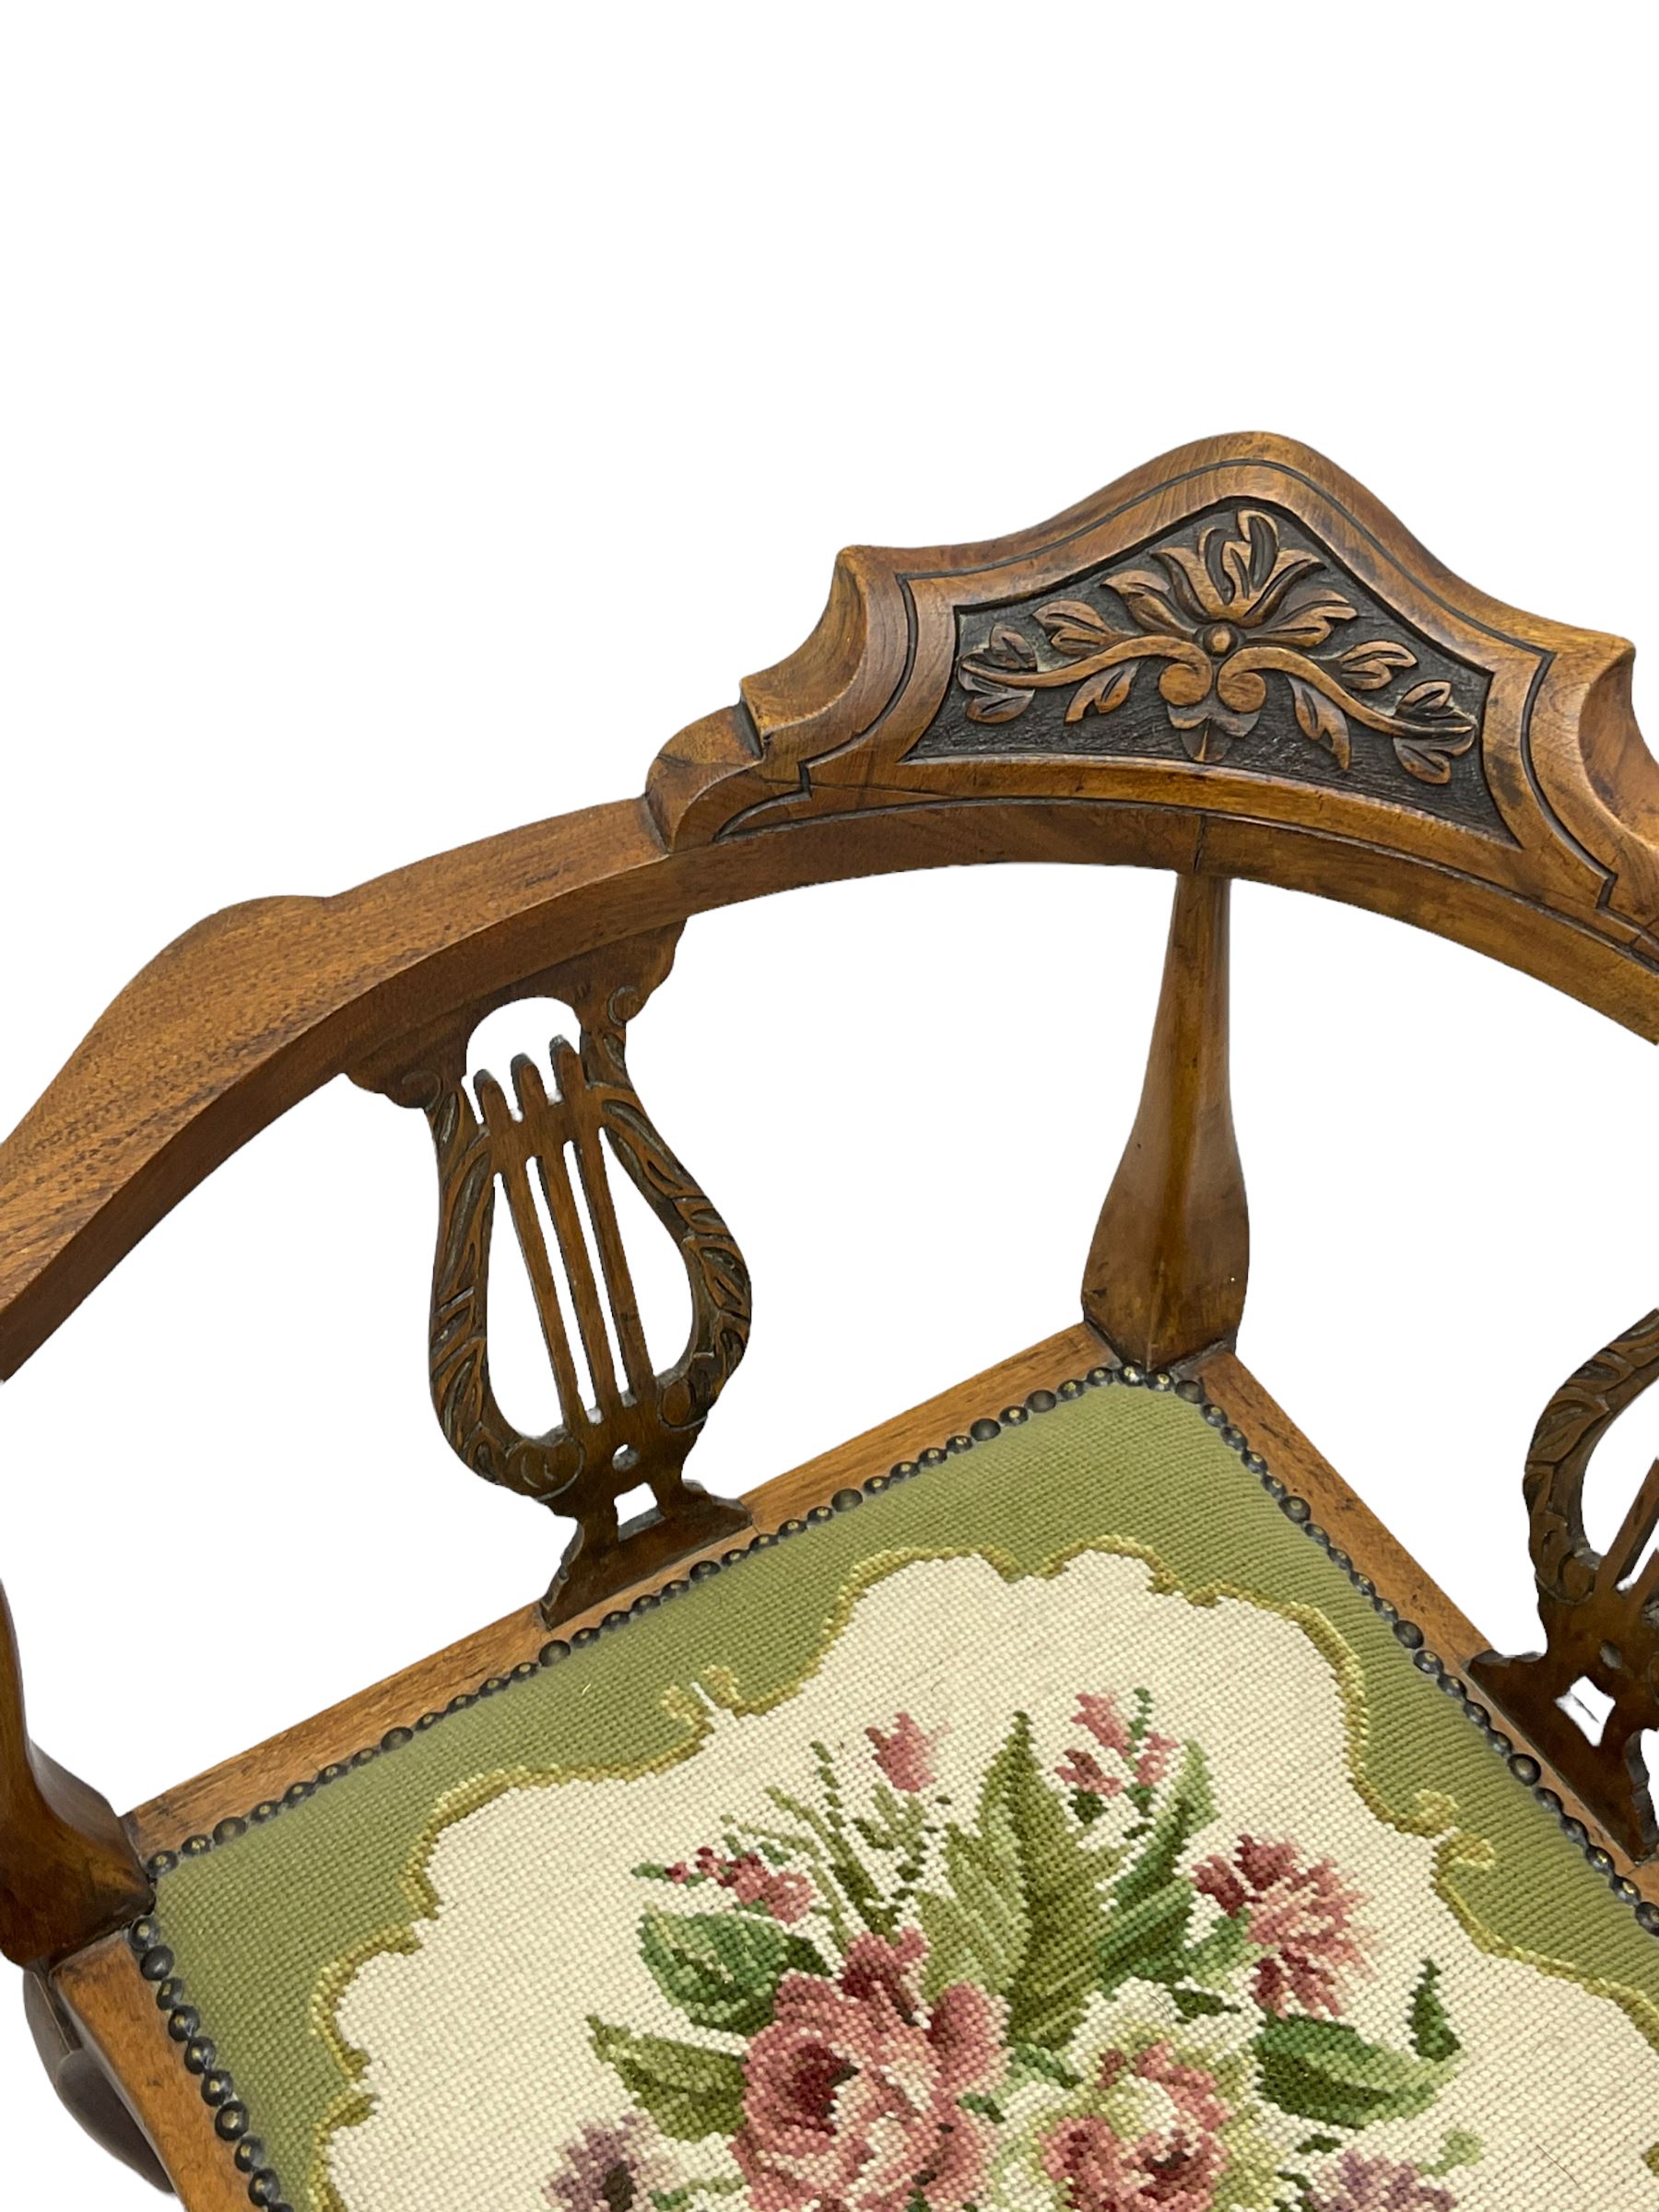 Edwardian stained beech corner chair with carved pediment - Image 3 of 4